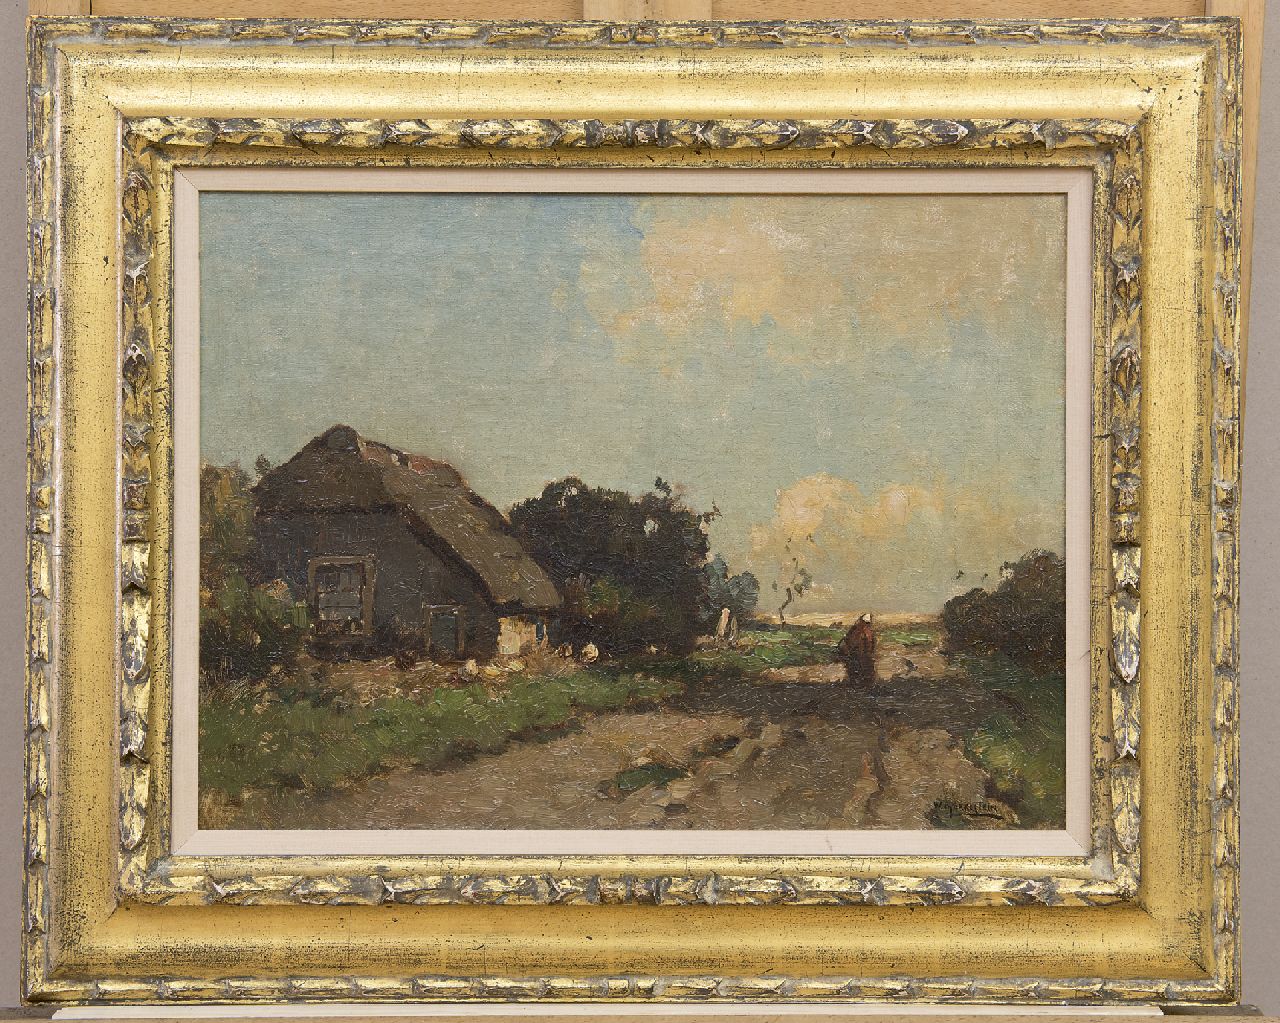 Knikker A.  | Aris Knikker, Farmer's wife near a cottage, oil on canvas 30.2 x 40.5 cm, signed signed with pseudonym 'W. Markestein'